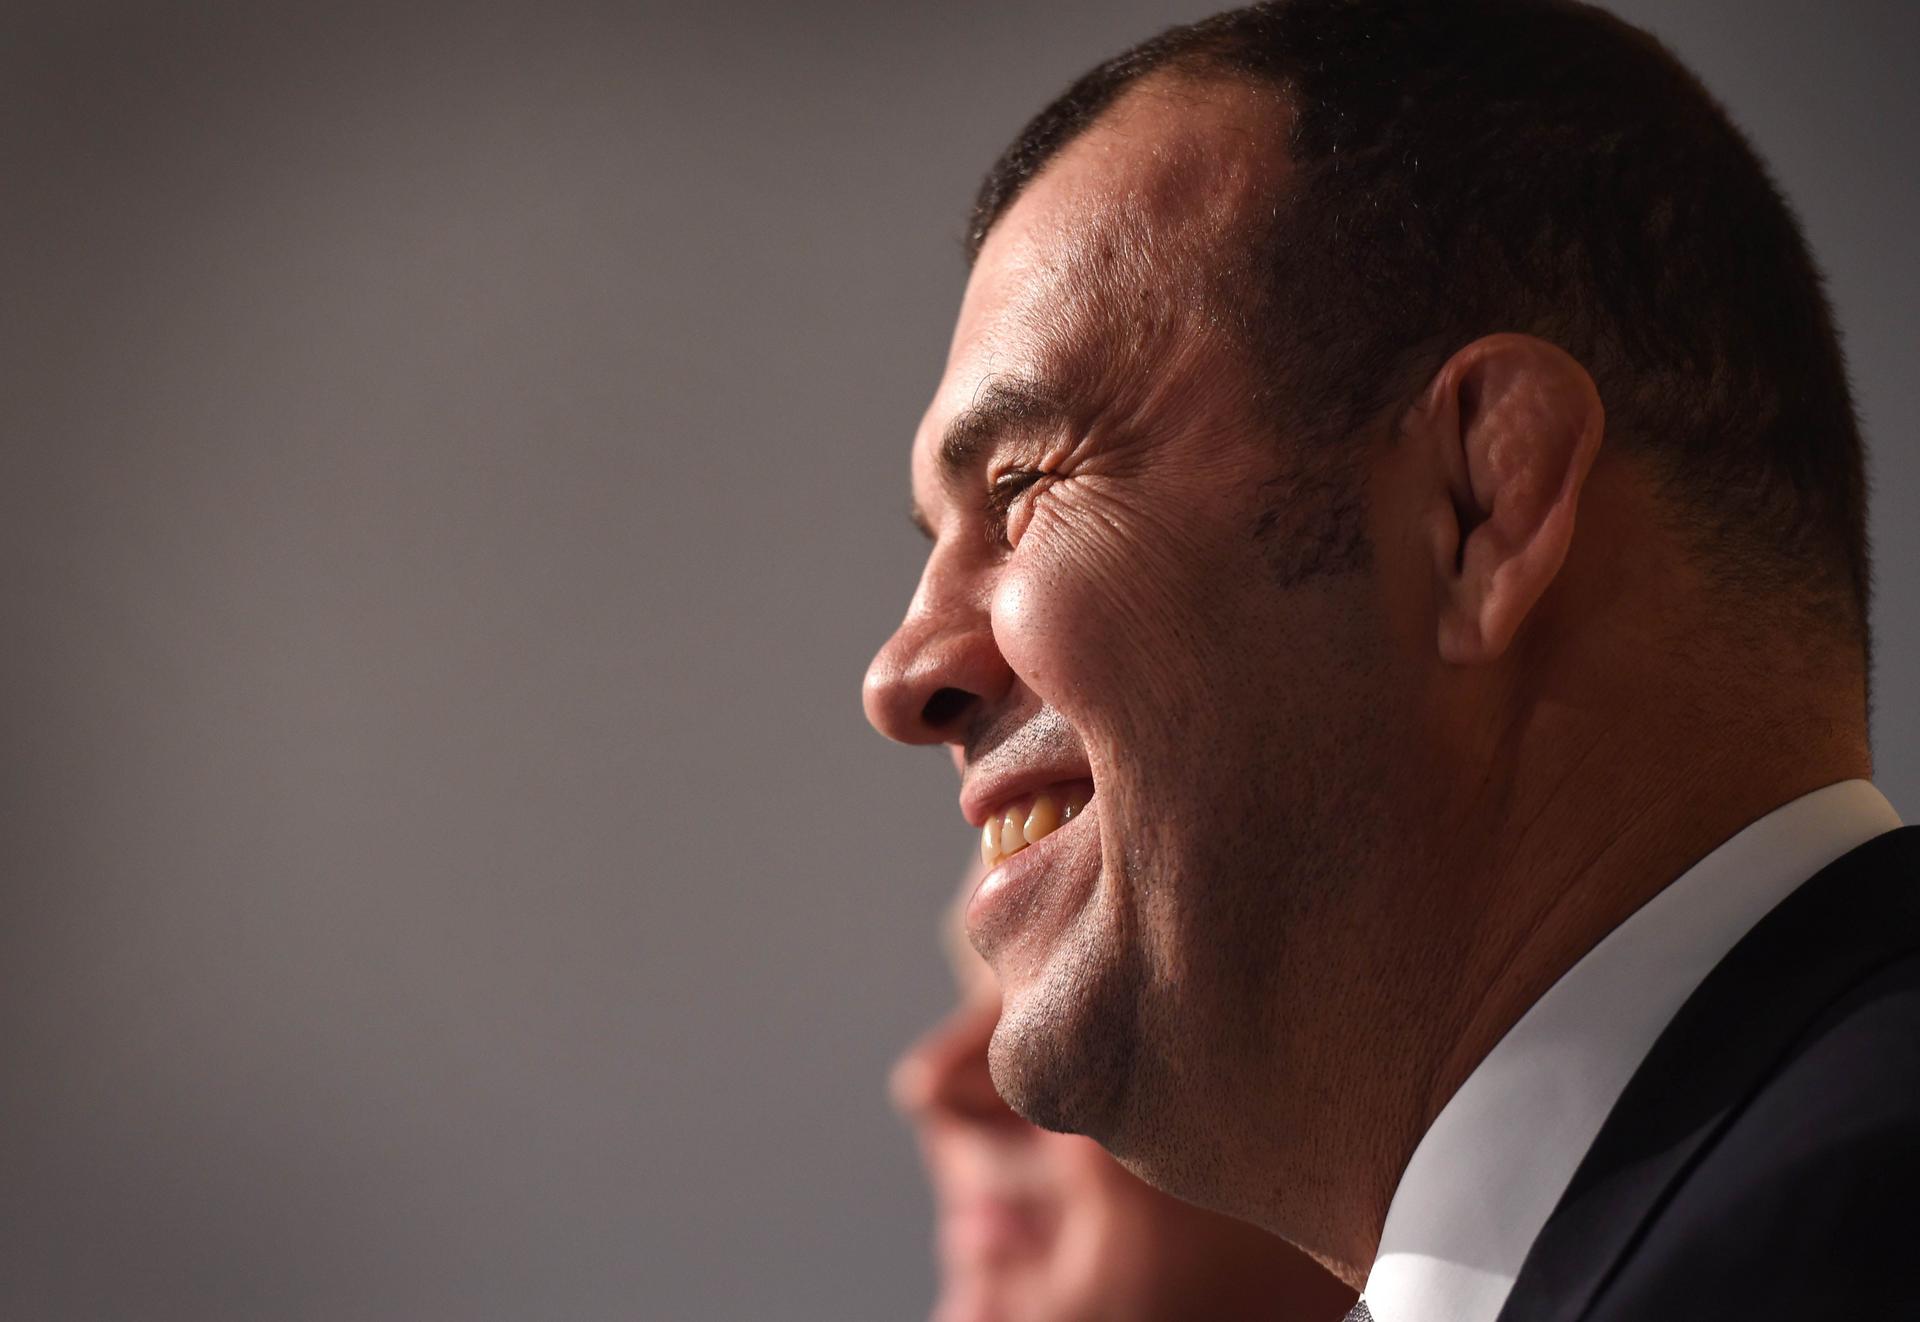 Michael Cheika follows an expansive, attacking style once known as the “Randwick Way”. Photo: AFP